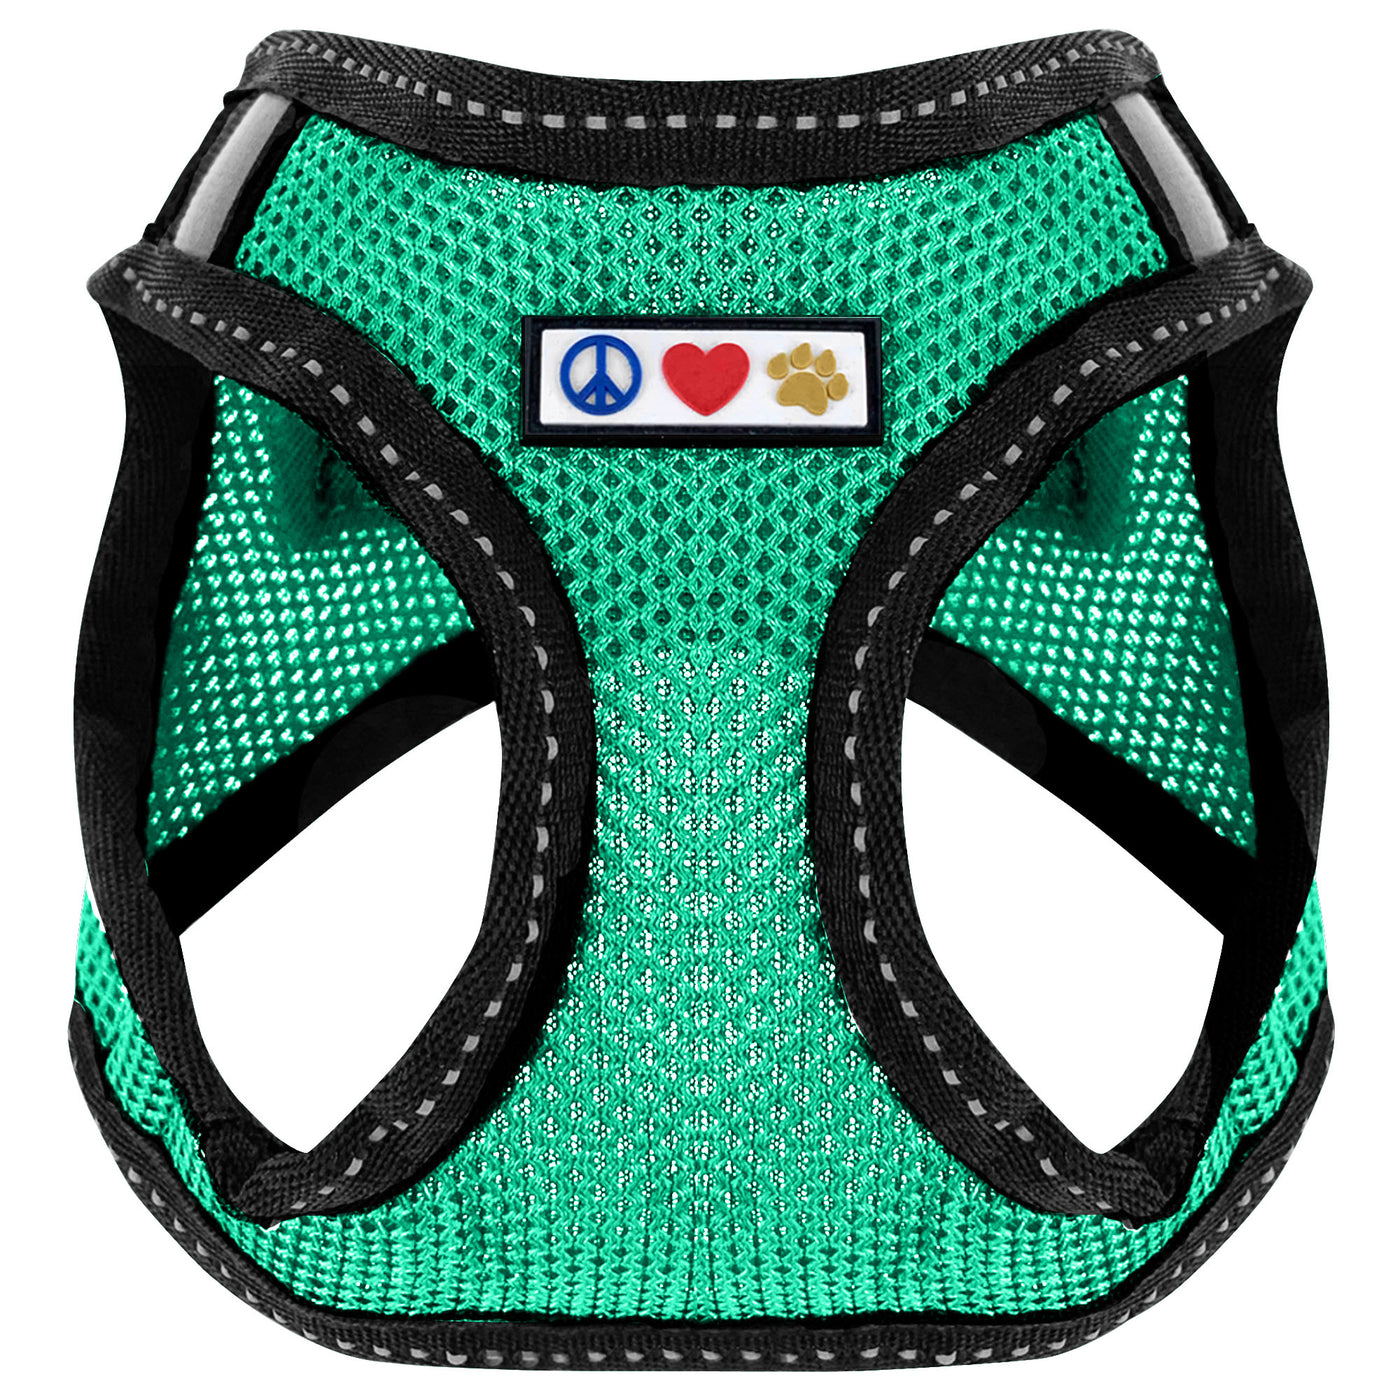 Aquemarine Mesh Harness Reflective for Dogs and Cats